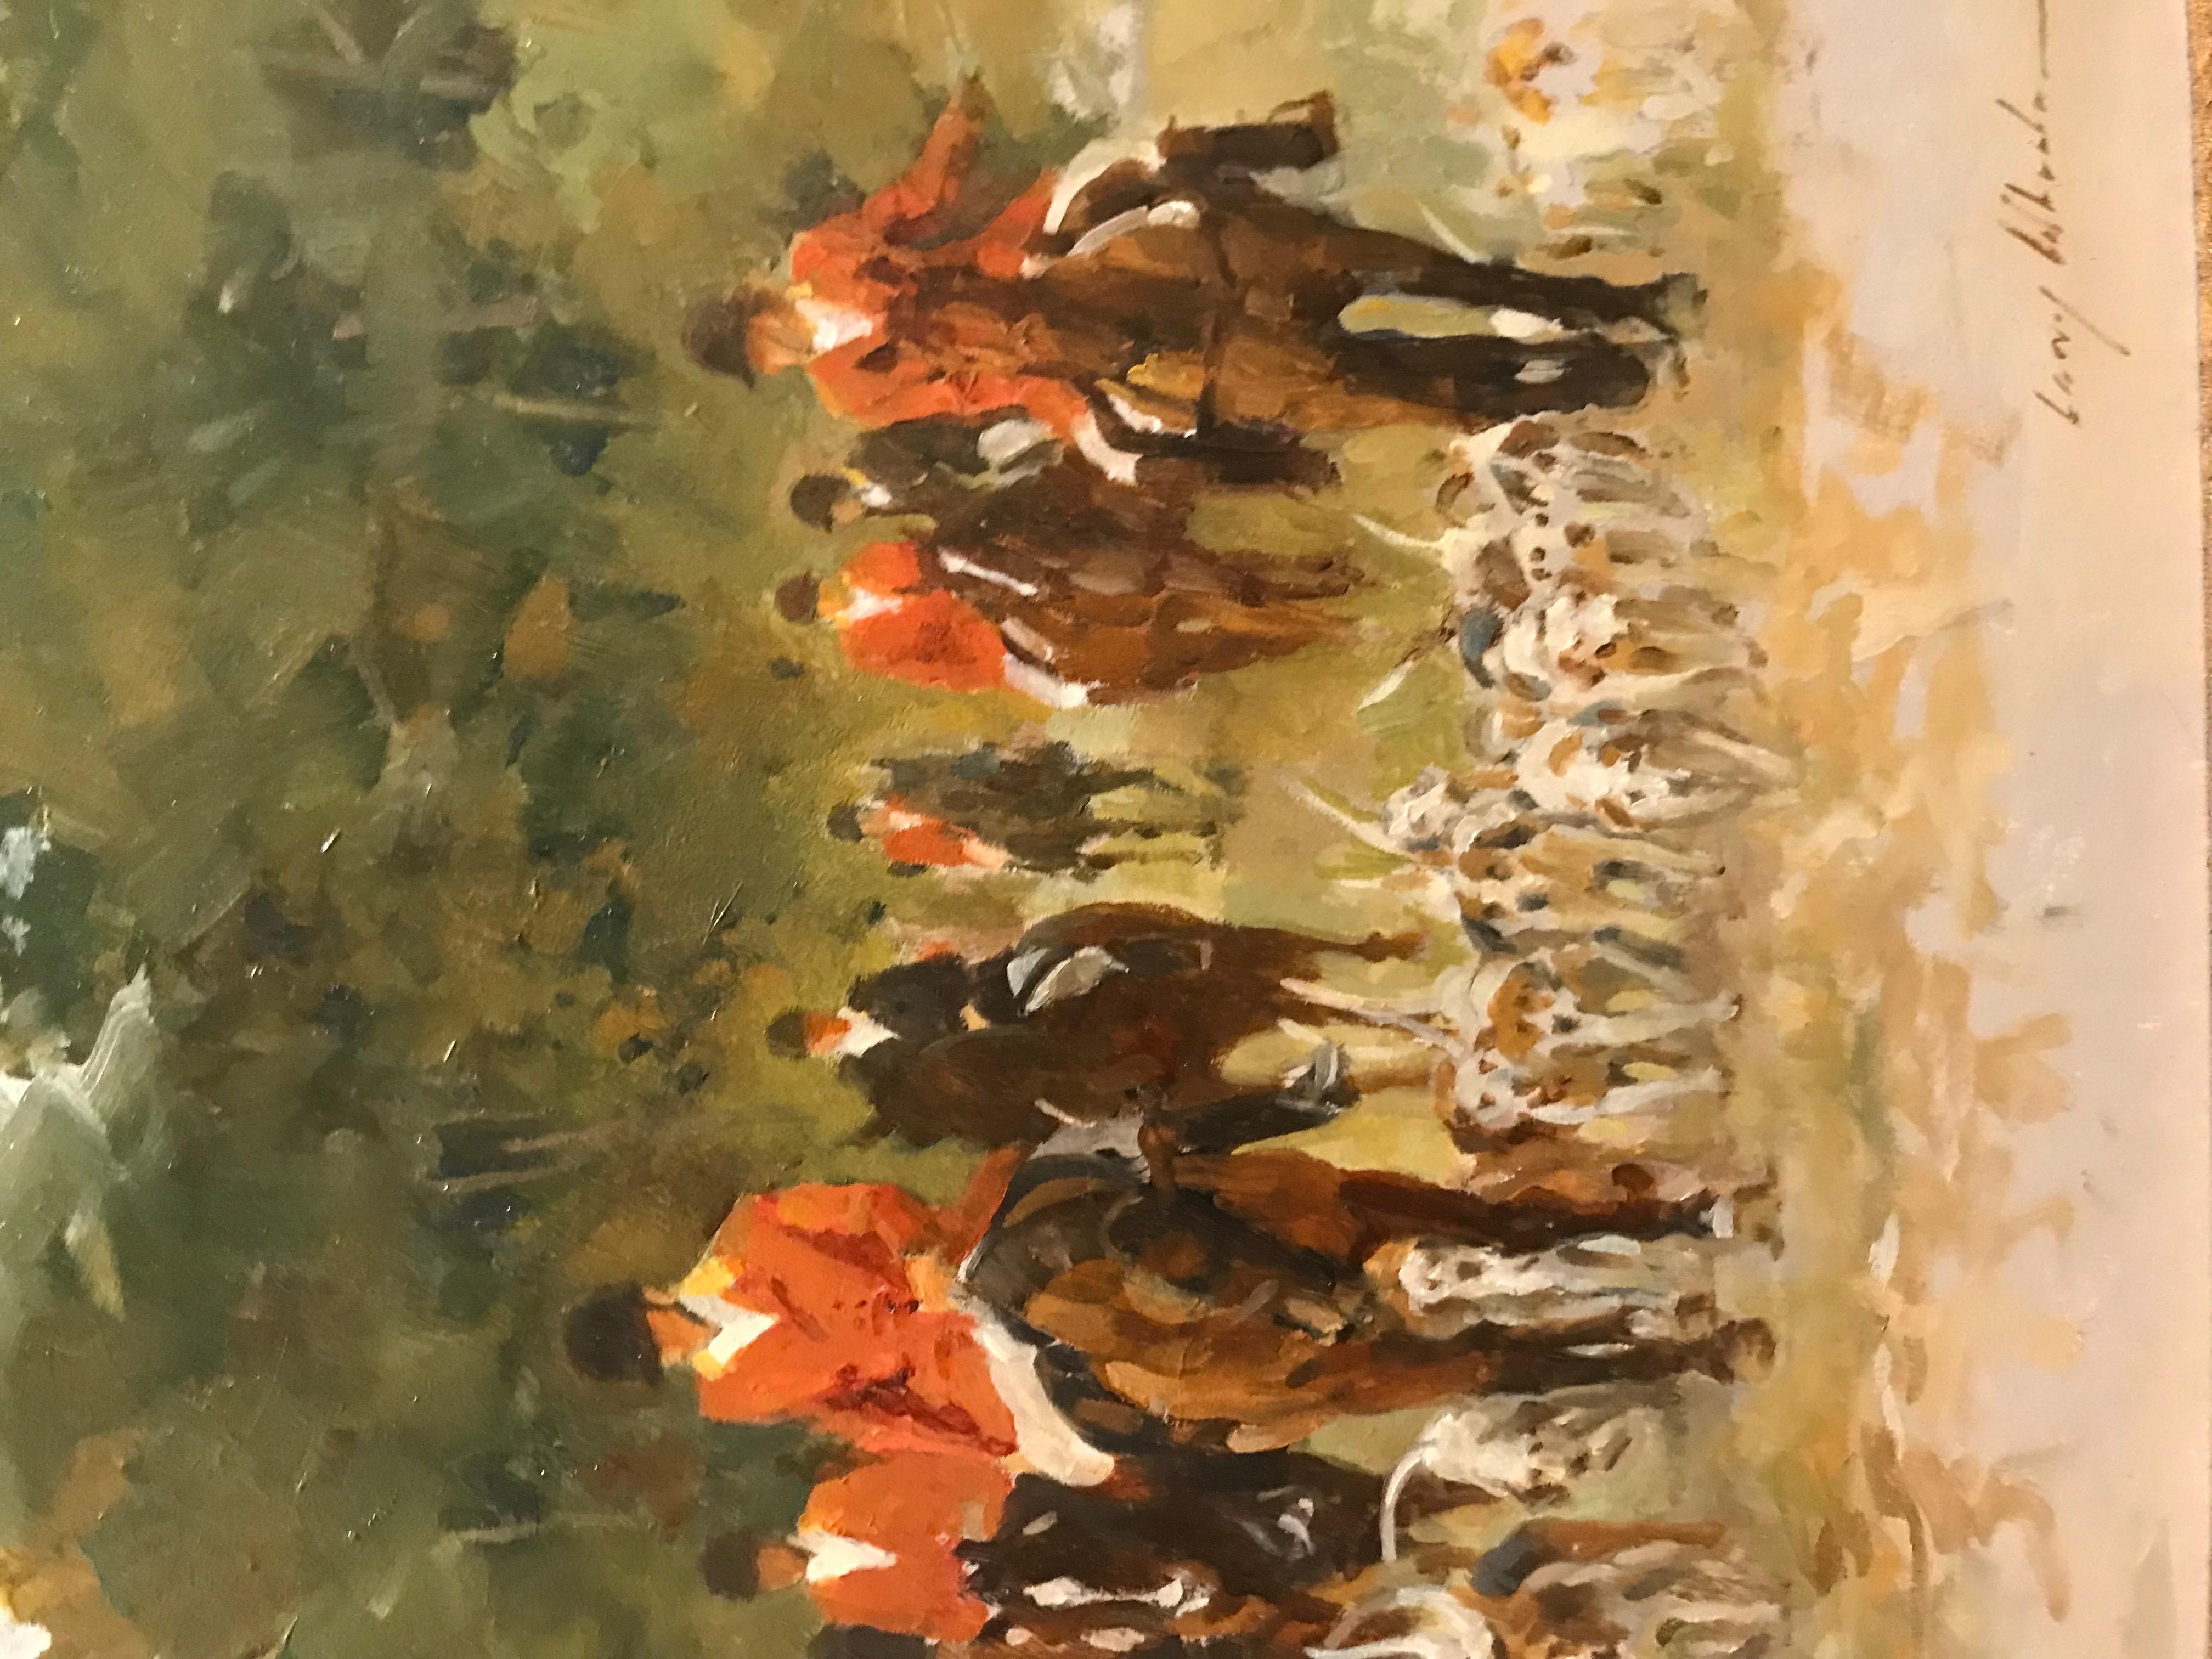 Contemporary, impressionistic Fox Hunt scene by well established equine artist - Painting by Larry Wheeler